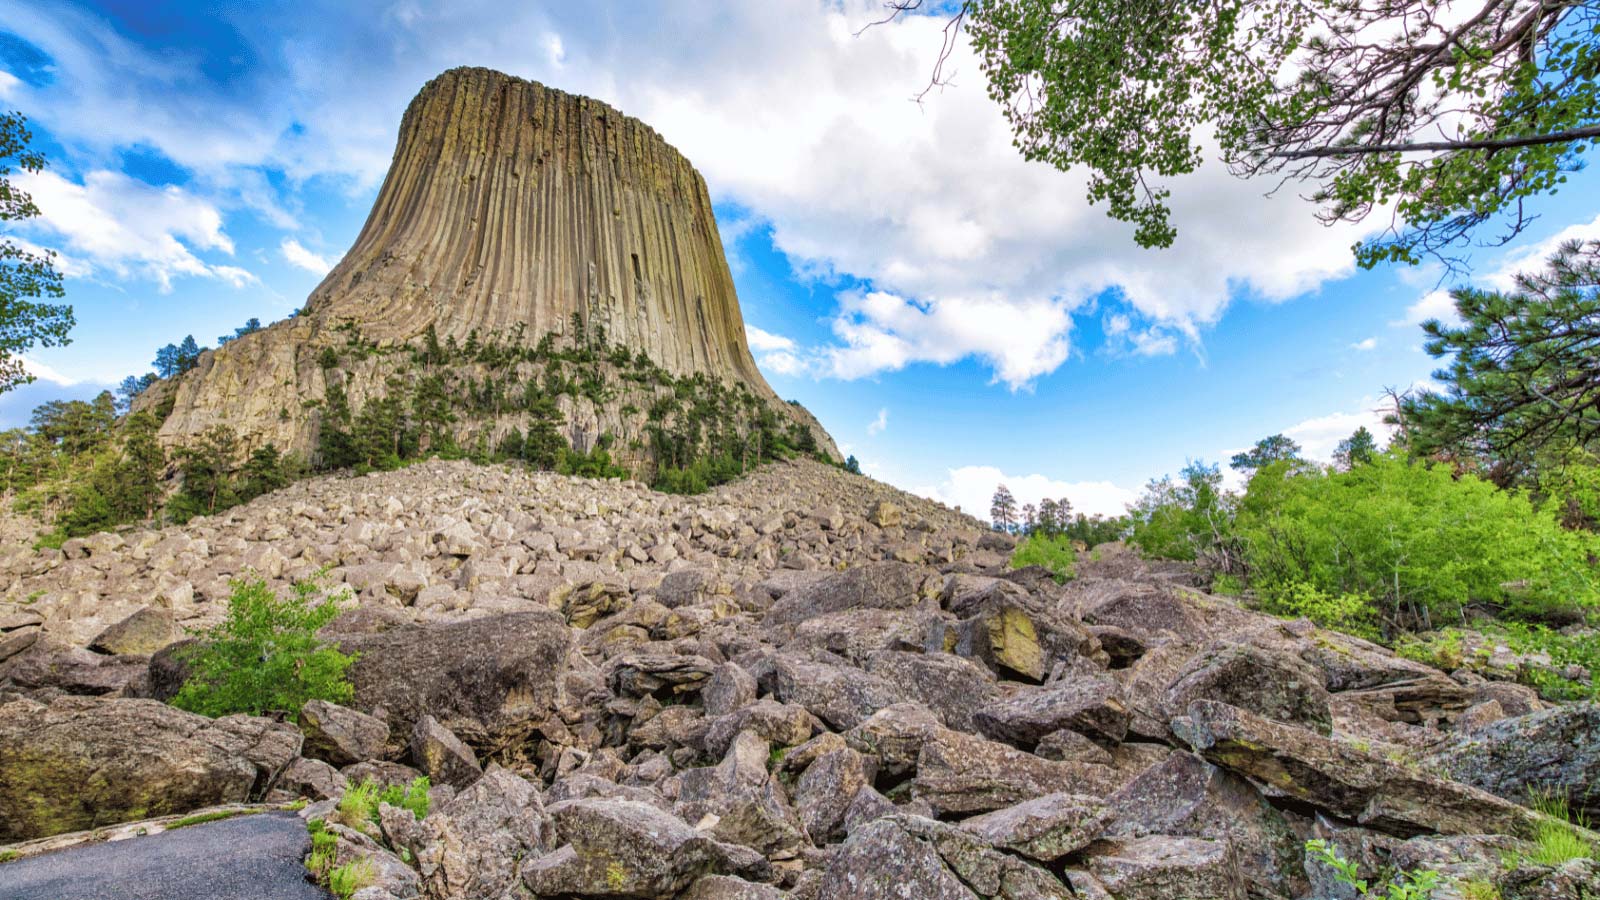 <p>Devils Tower stands 1267 feet tall and is located in the northwest corner of the Black Hills. It was declared a monument by Teddy Roosevelt in 1906.</p>